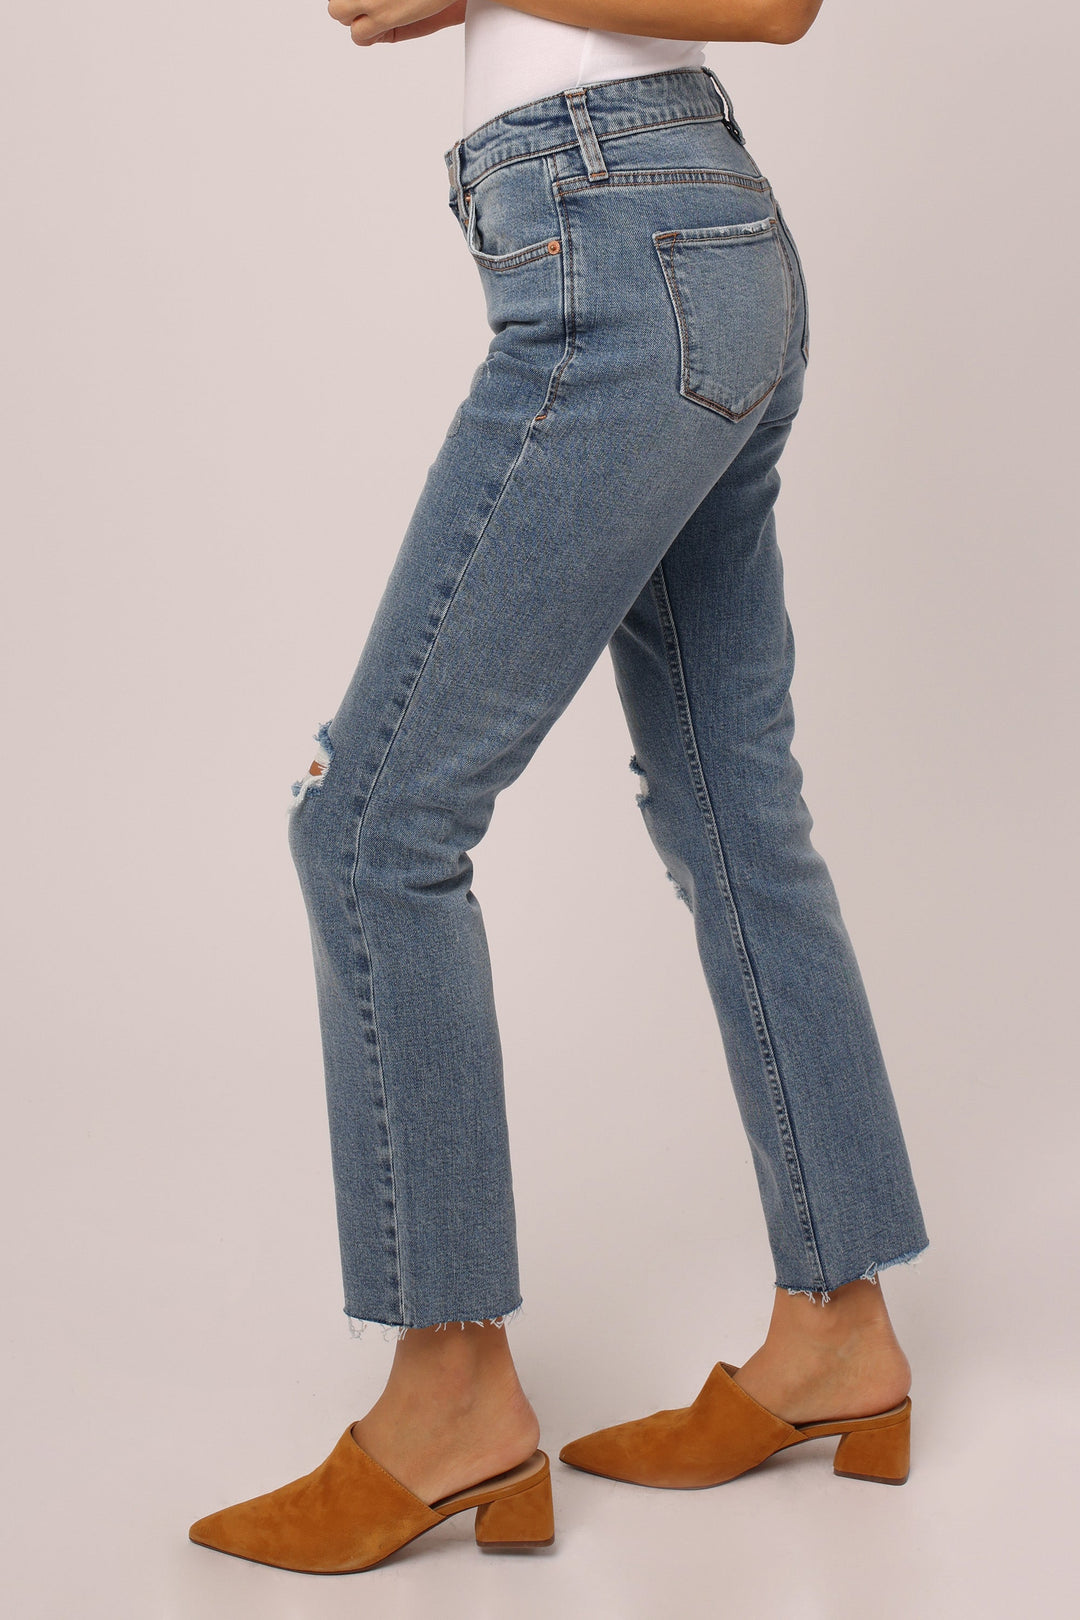 image of a female model wearing a BLAIRE HIGH RISE SLIM STRAIGHT JEANS LINFIELD JEANS